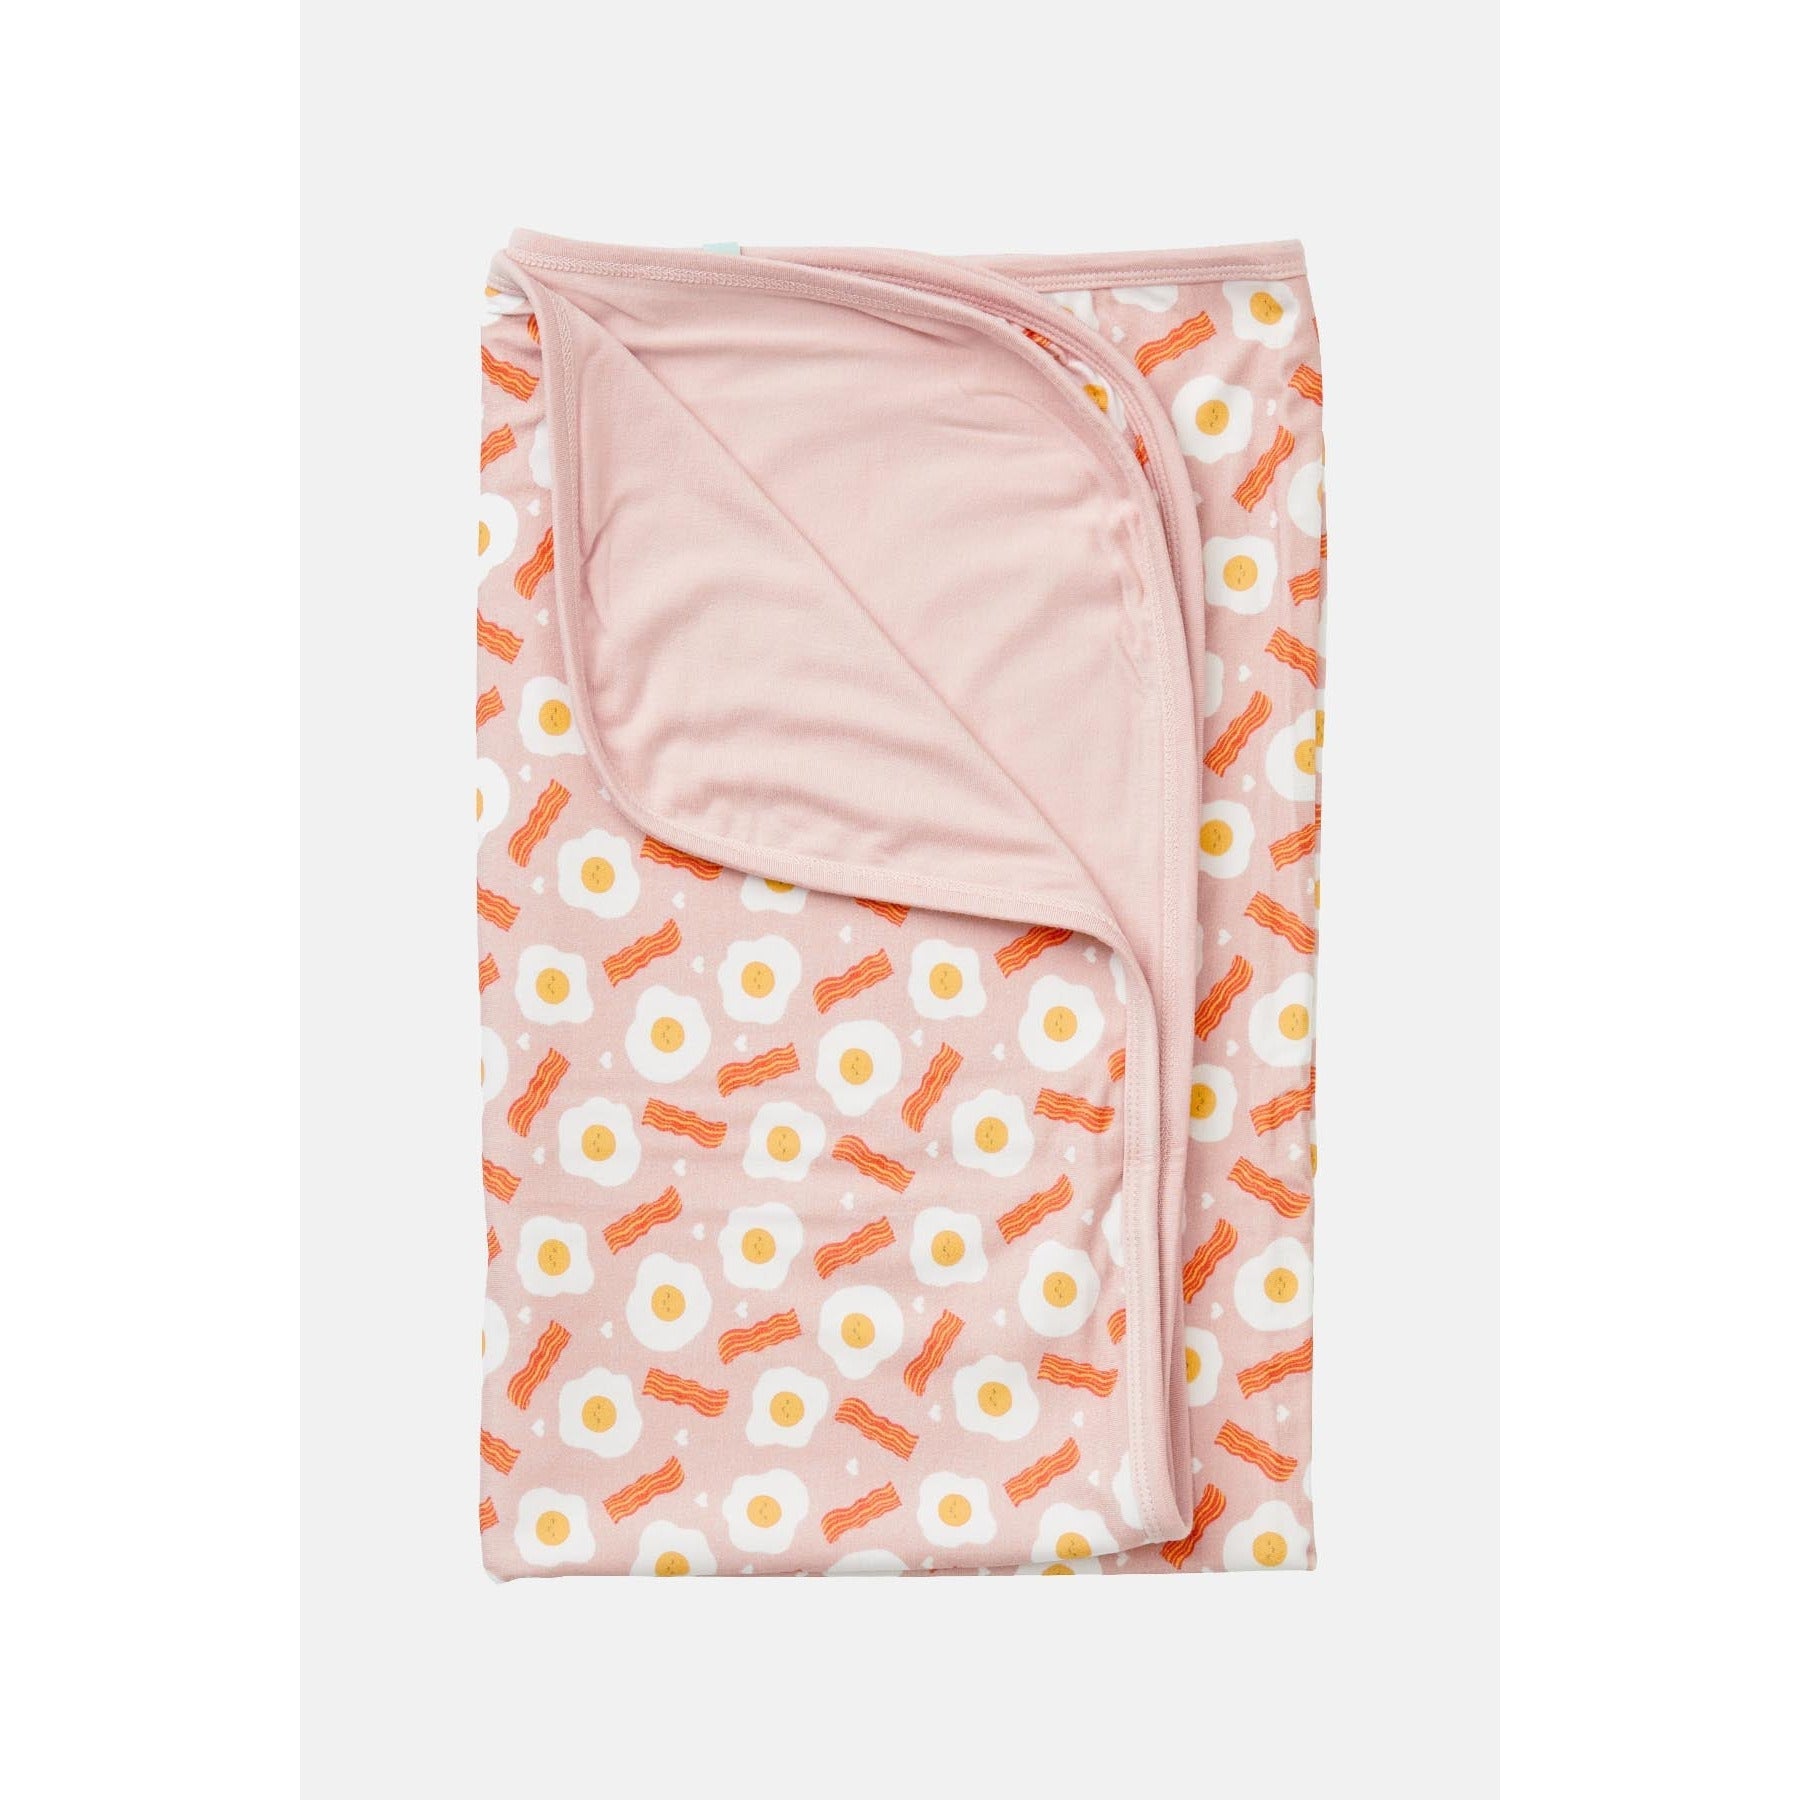 Stretchy Oversized Blanket - Bacon & Eggs Pink